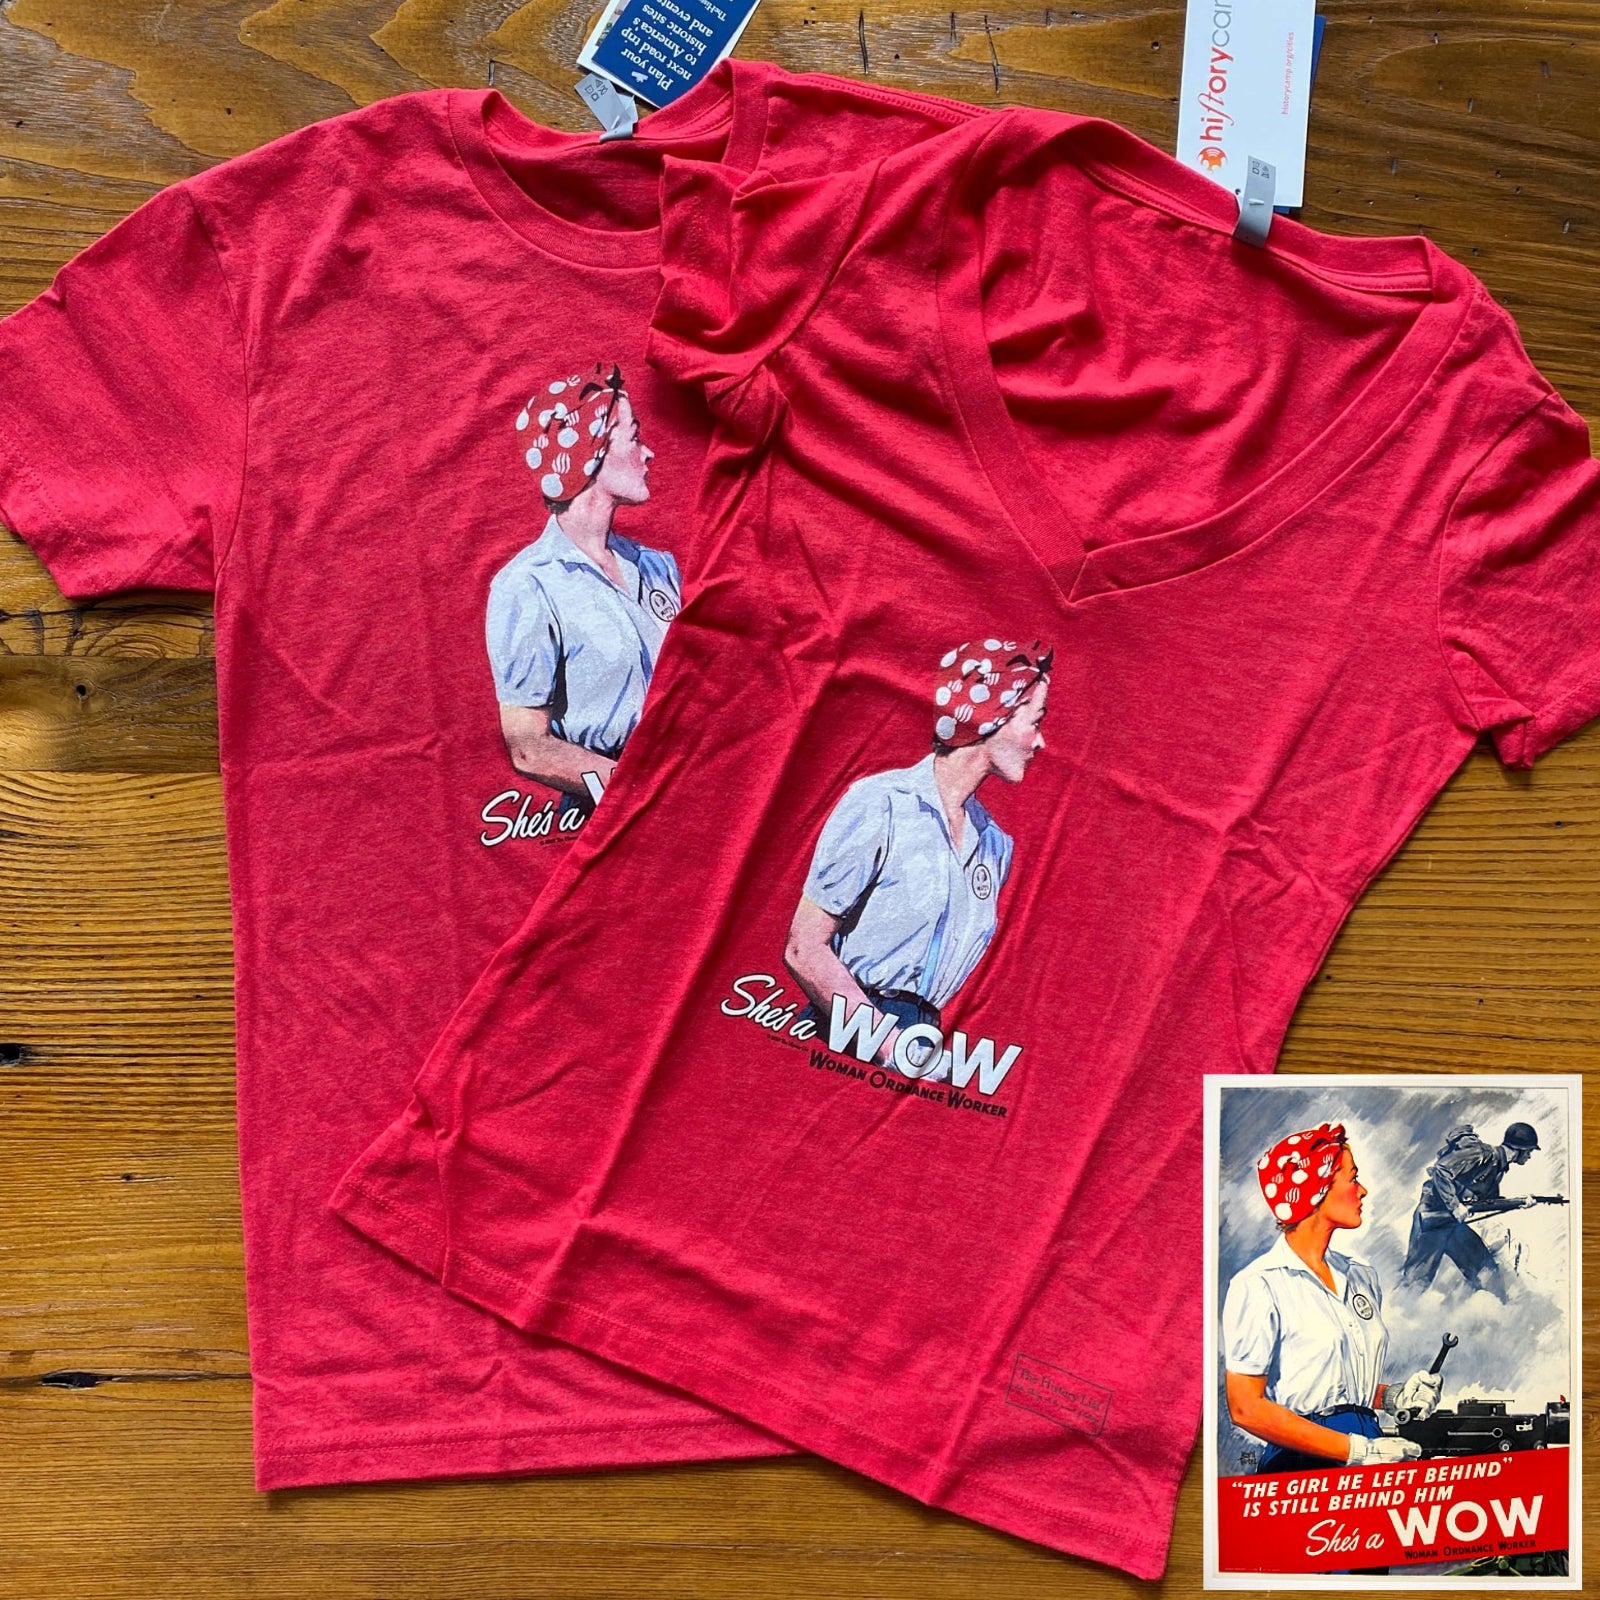 "She's a W.O.W." V-neck shirt from The History List store